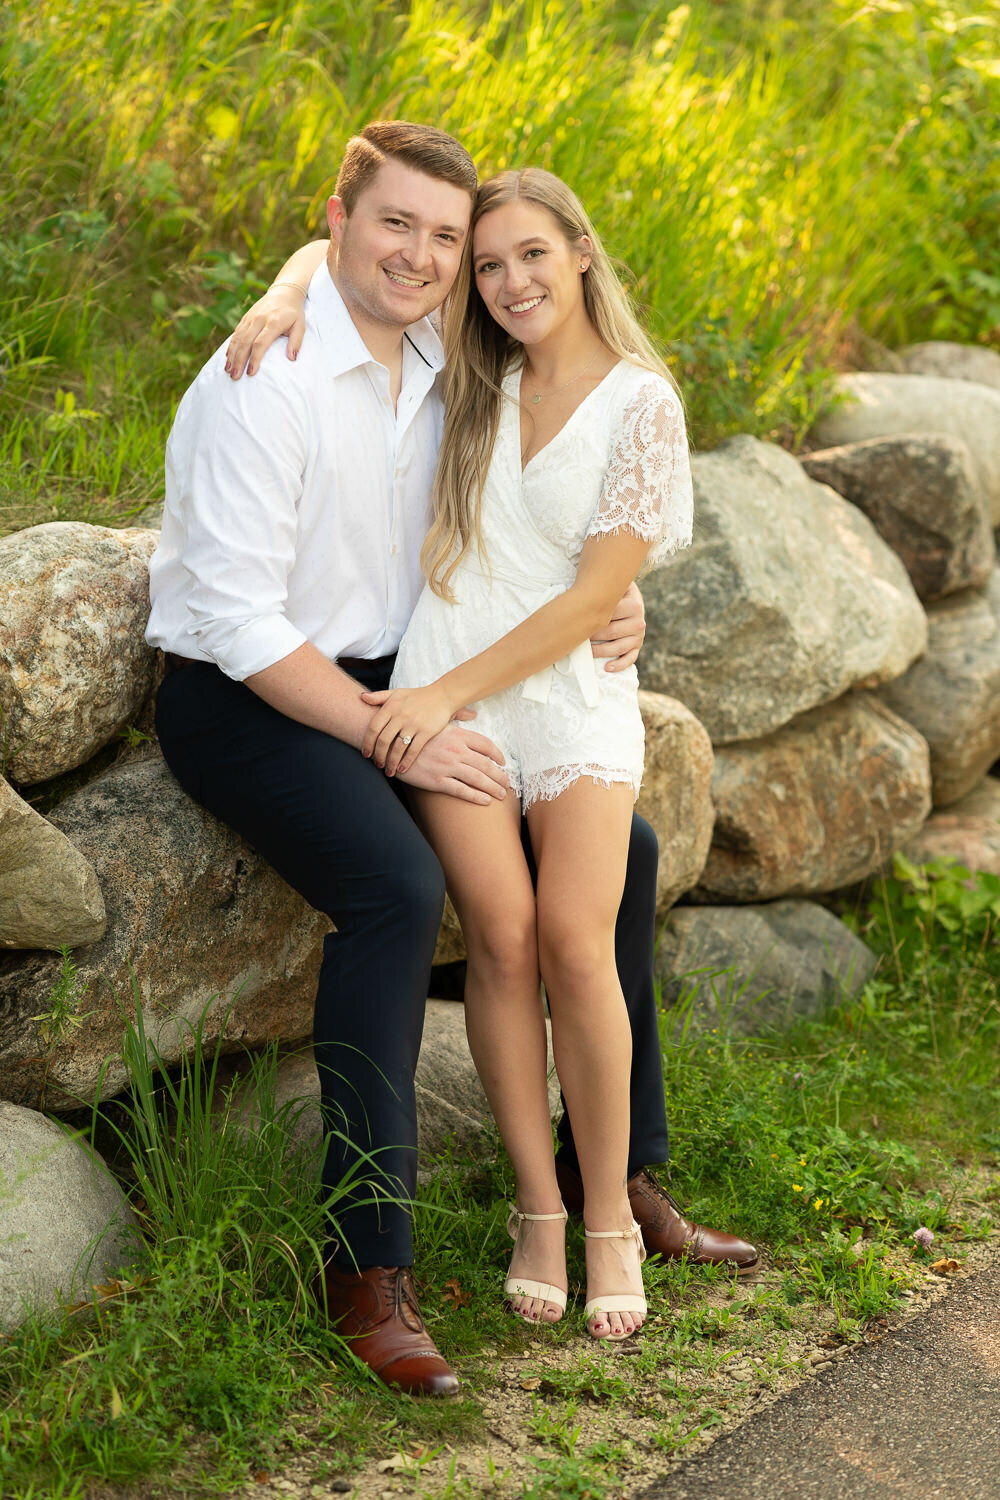 Man and woman dressed in white smile on rocks in Eagan, Minnesota.